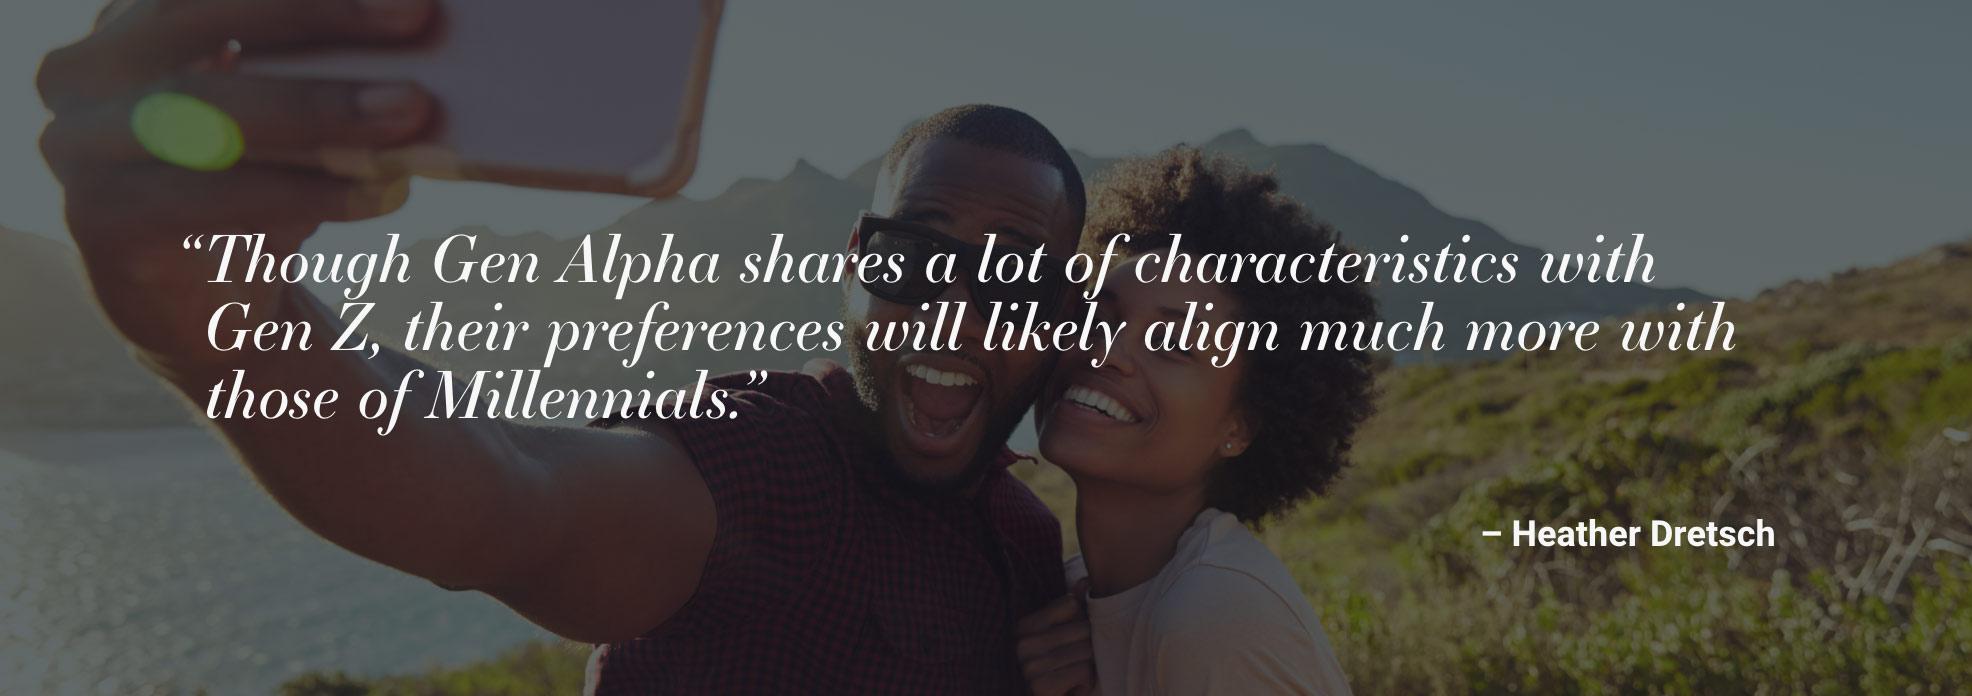 "Though Gen Alpha shares a lot of characteristics with Gen Z, their preferences will likely align much more with those of Millennials." - Heather Dretsch